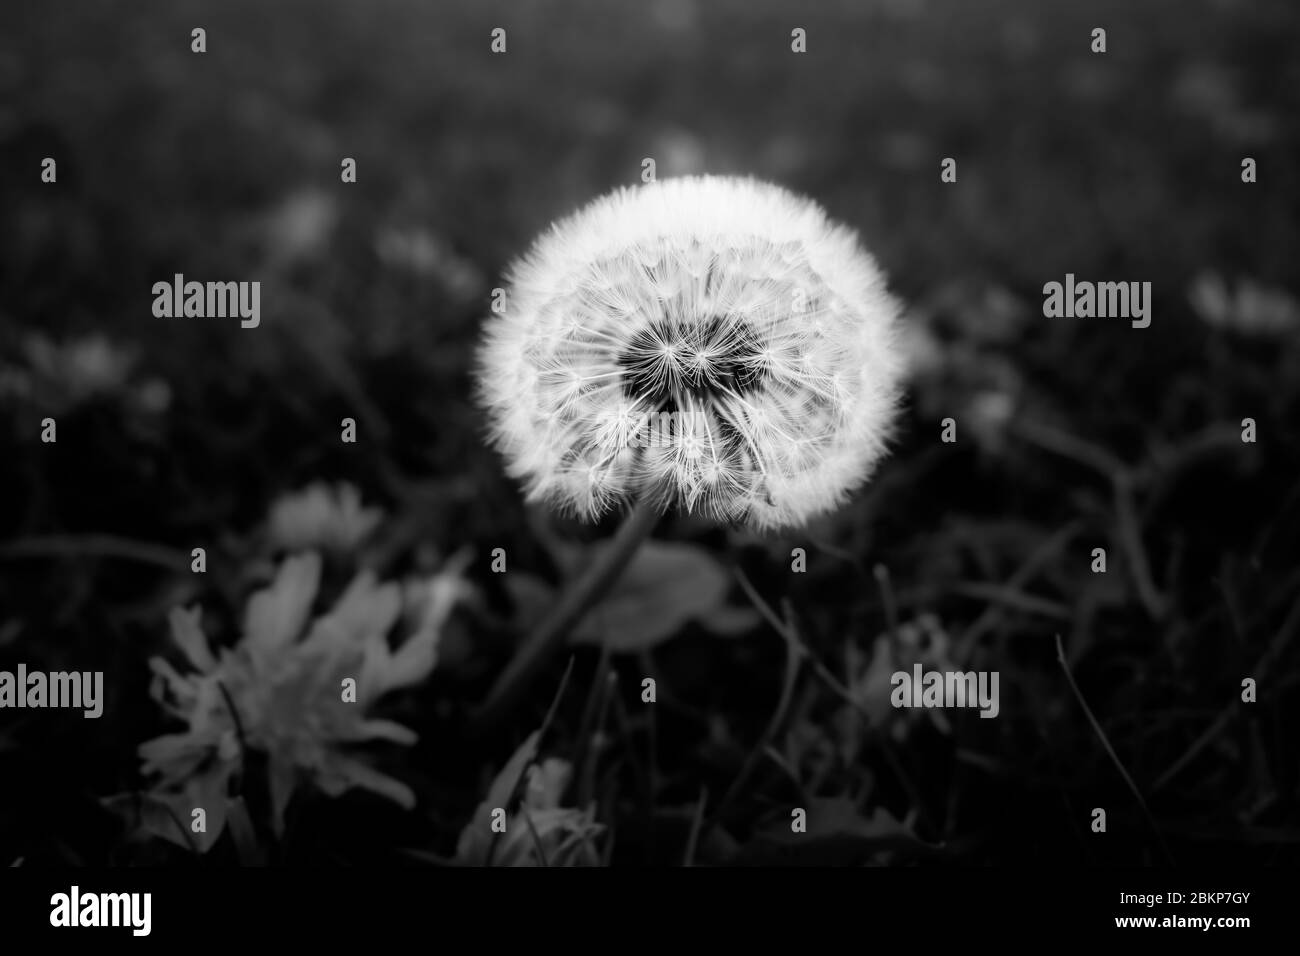 Dandelion Clock in a Meadow with Dandelion Flowers. Black and White Stock Photo